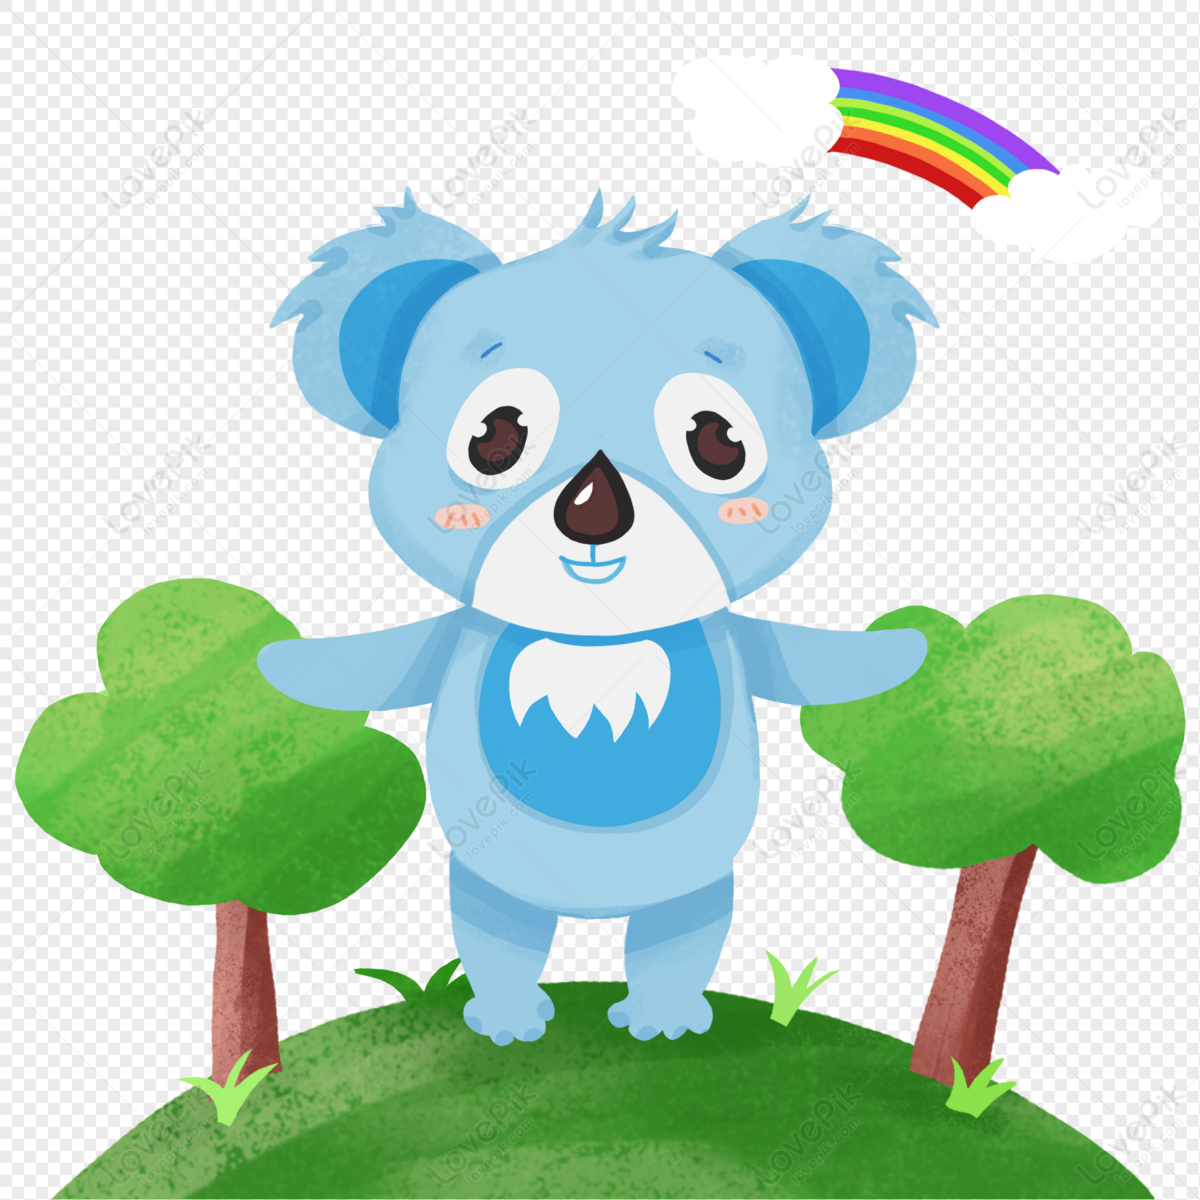 Cute Koala PNG Transparent And Clipart Image For Free Download - Lovepik |  401278966